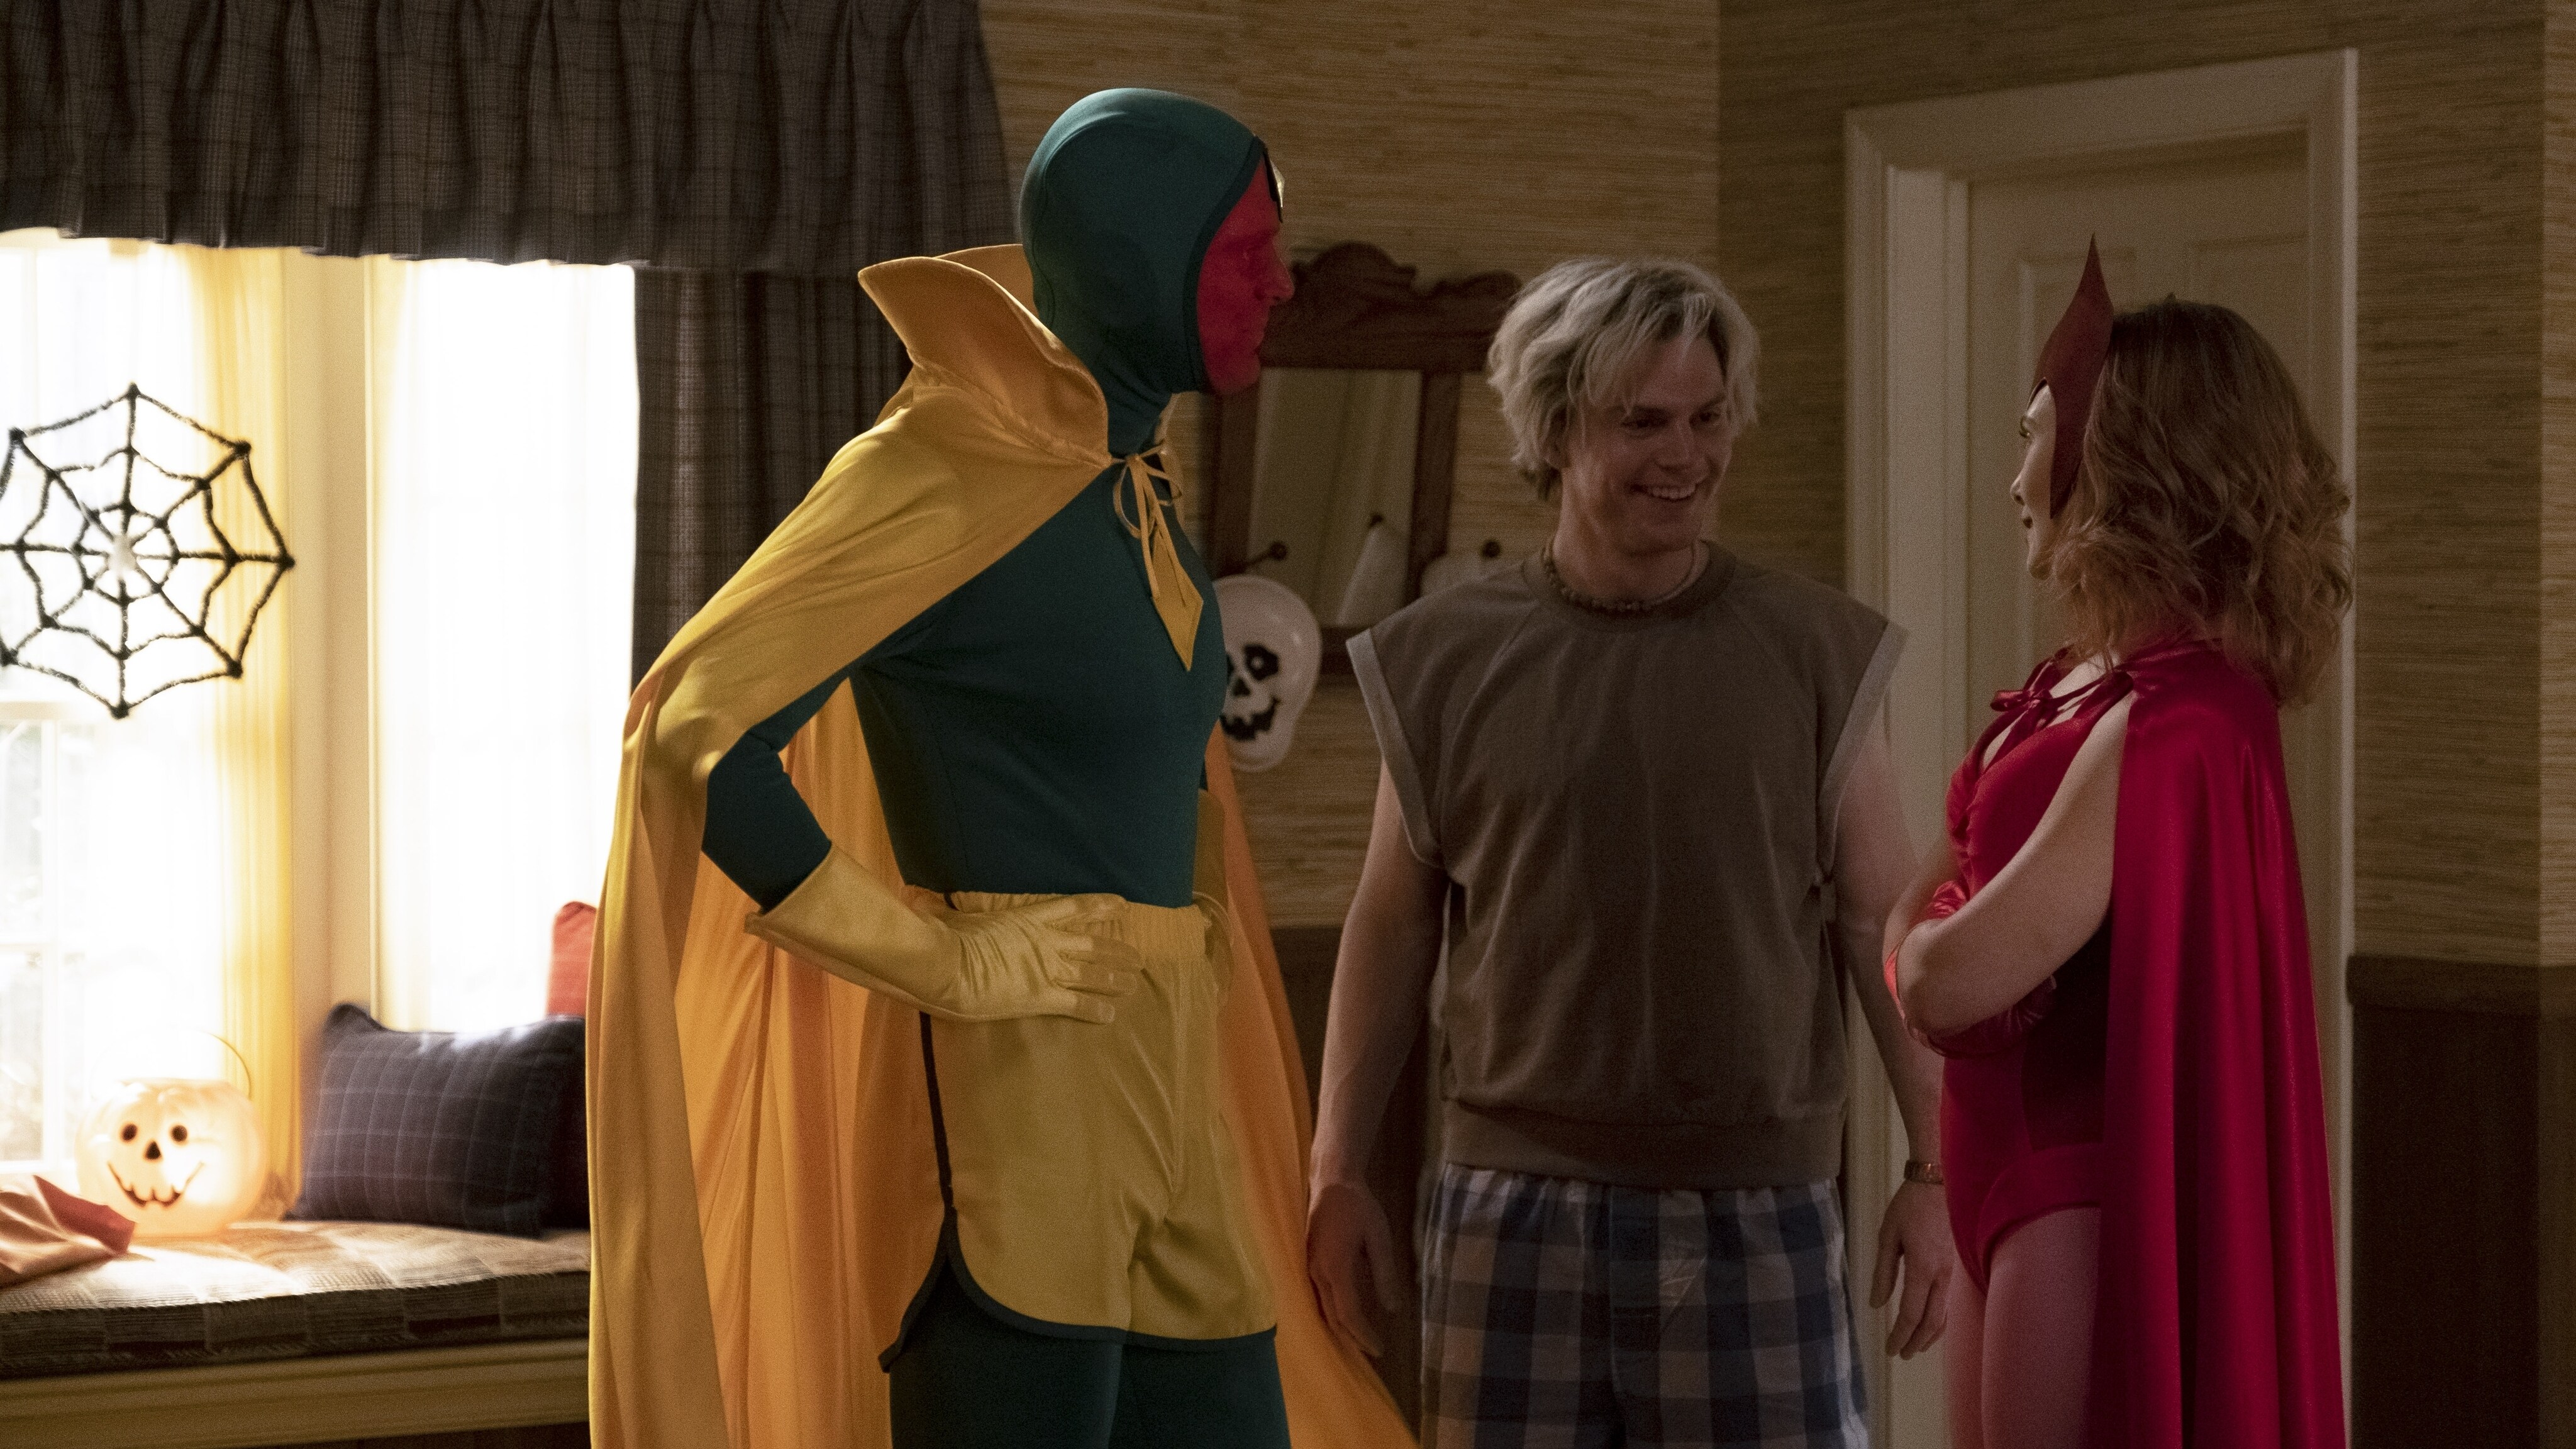 (L-R): Paul Bettany as Vision, Evan Peters as Pietro and Elizabeth Olsen as Wanda Maximoff in Marvel Studios' WANDAVISION exclusively on Disney+. Photo by Chuck Zlotnick. ©Marvel Studios 2021. All Rights Reserved. 